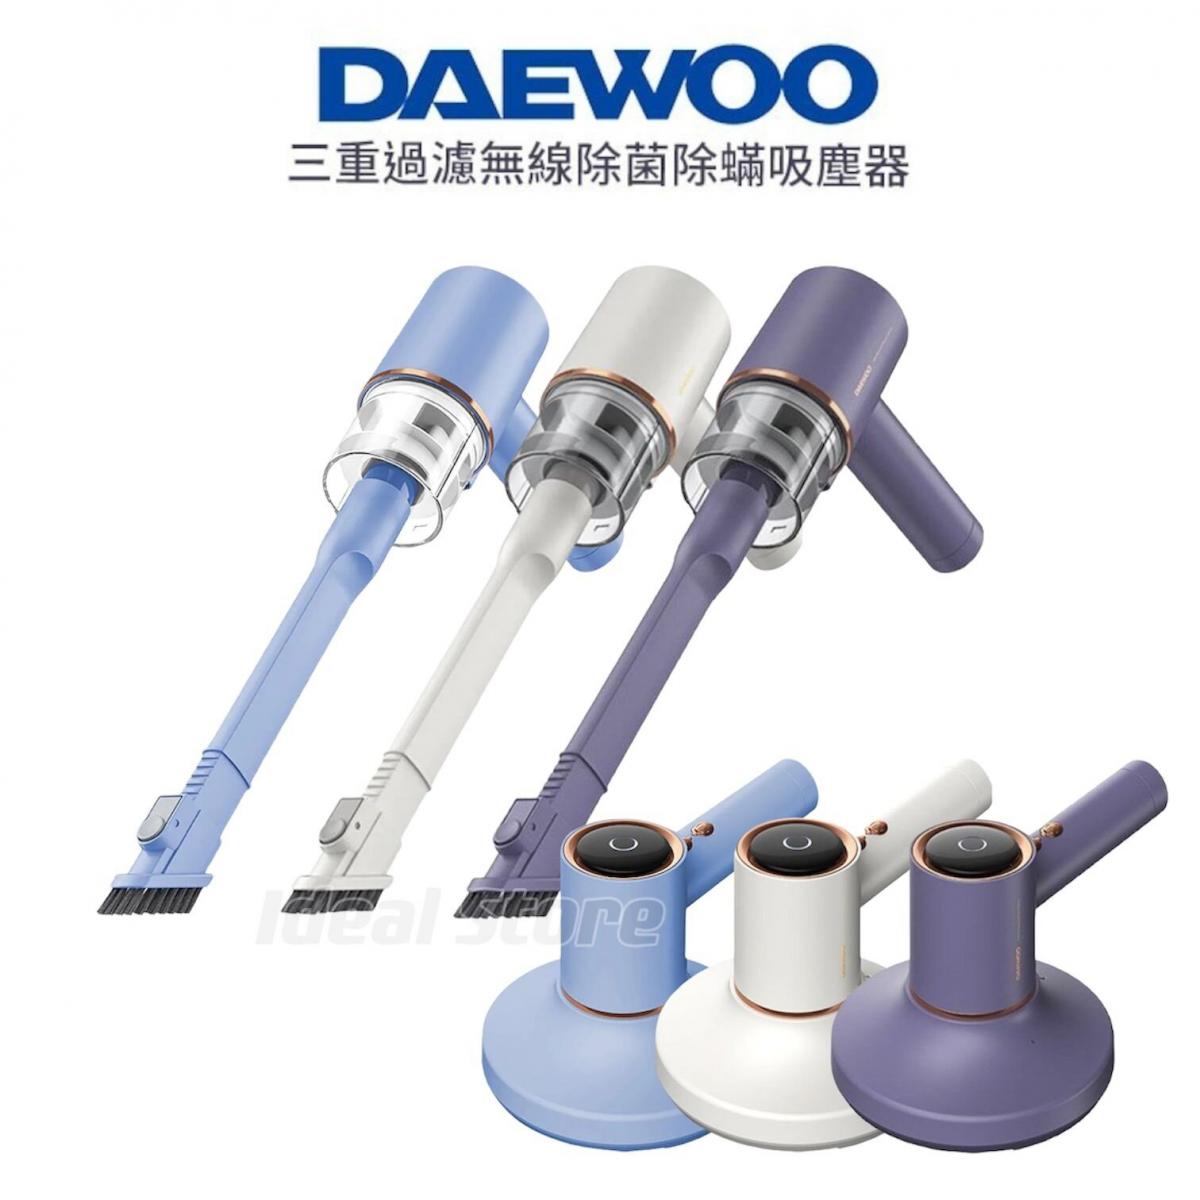 DAEWOO - South Korea's Daewoo V1 three-in-one smart wireless mite removal vacuum cleaner | Mite removal machine | Vacuum cleaner 